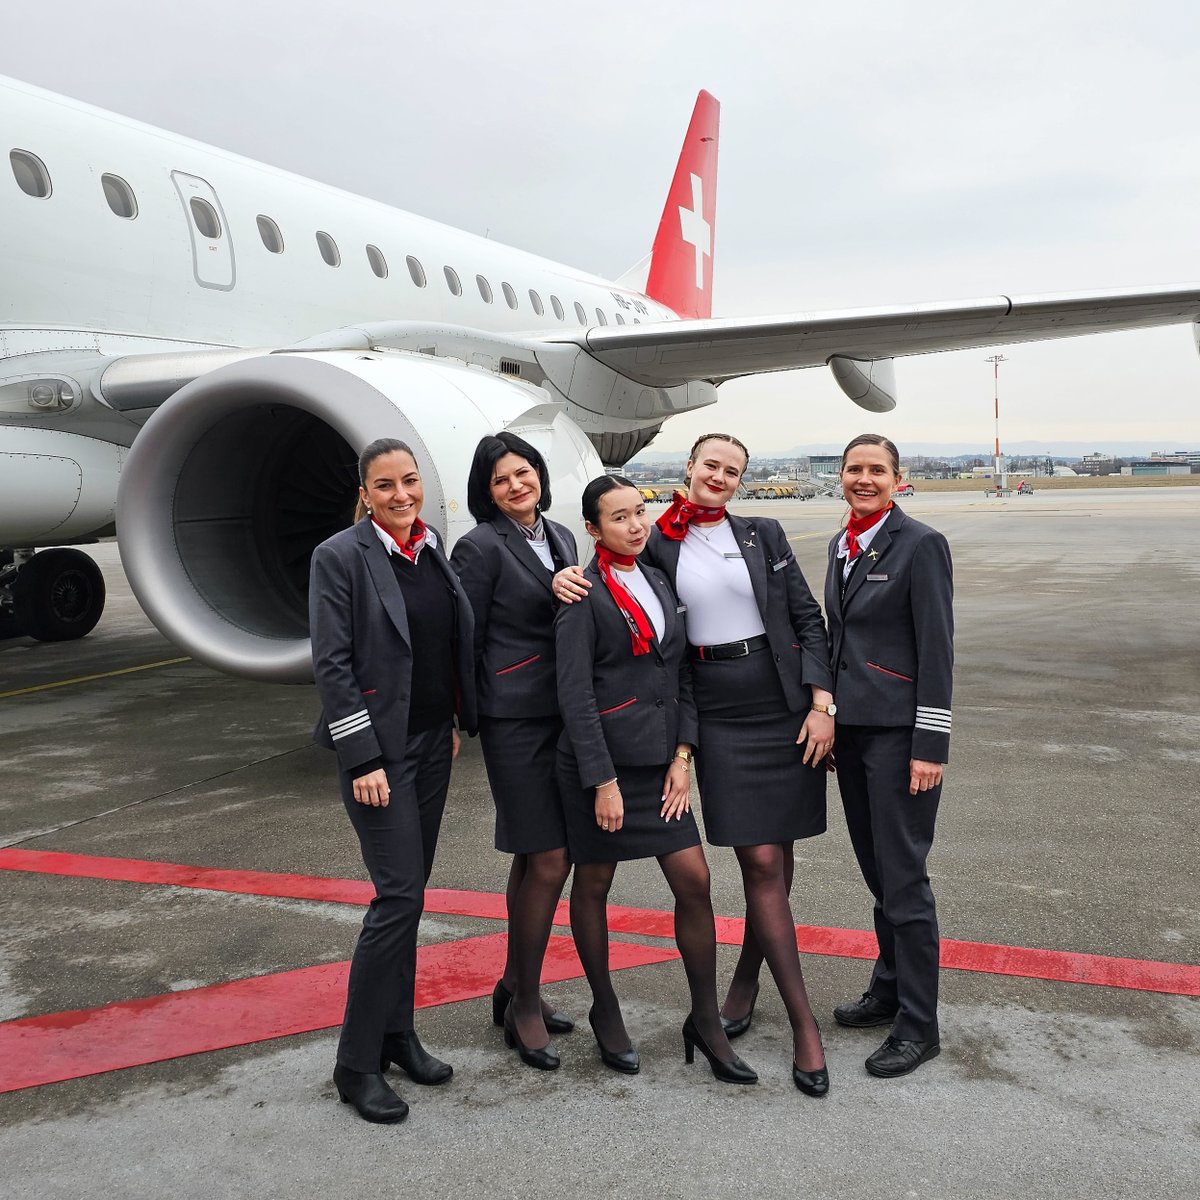 Happy International Women's Day ✈! We celebrate woman power not only today, but everyday. There is no limit to what women can accomplish, whether in the skies or on the ground. Today's all-female crew shows that nothing is impossible if one has the will to achieve it💪👩‍✈️.